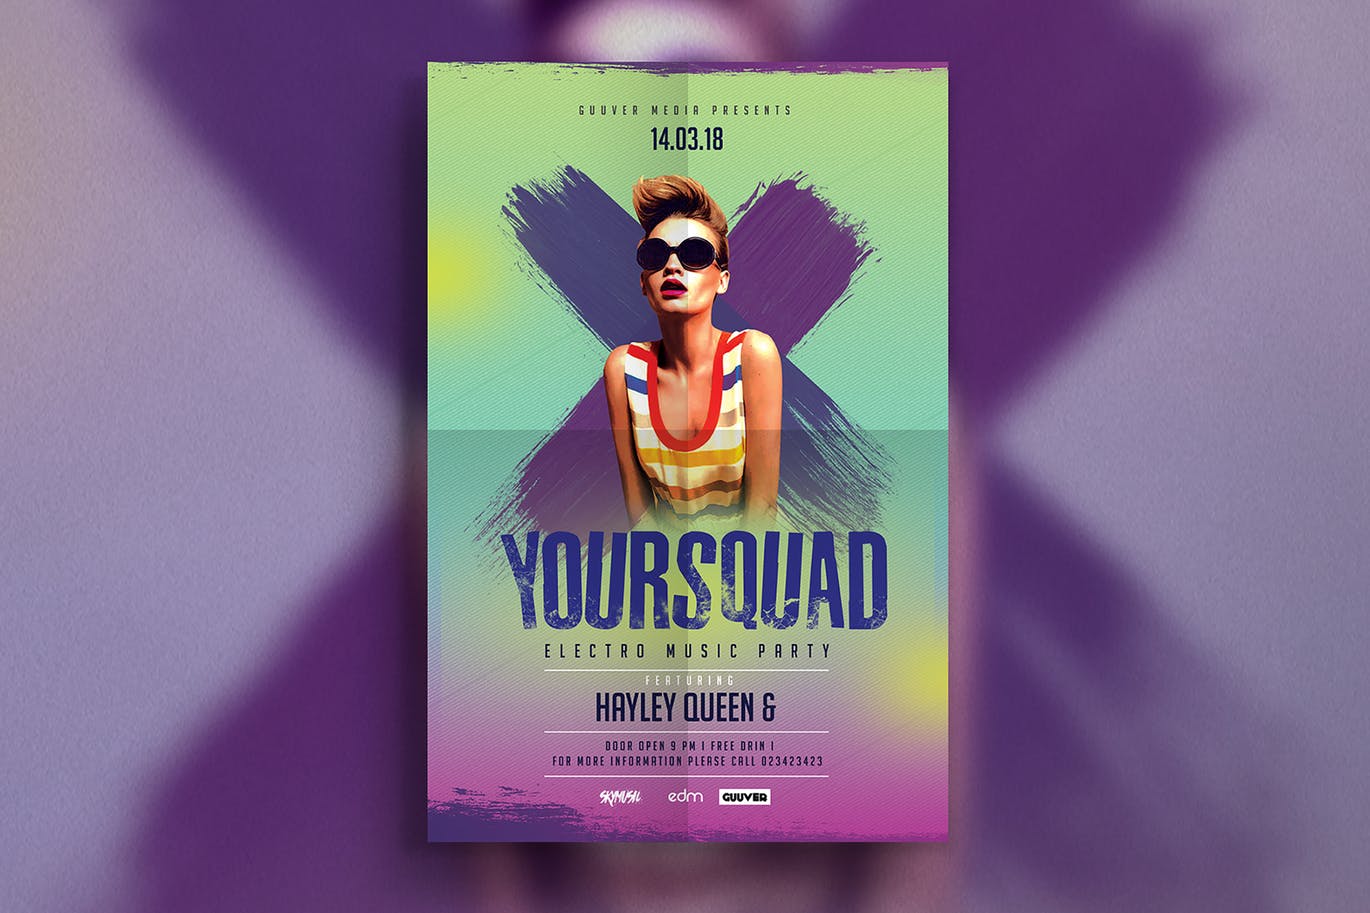 A squad party music flyer template